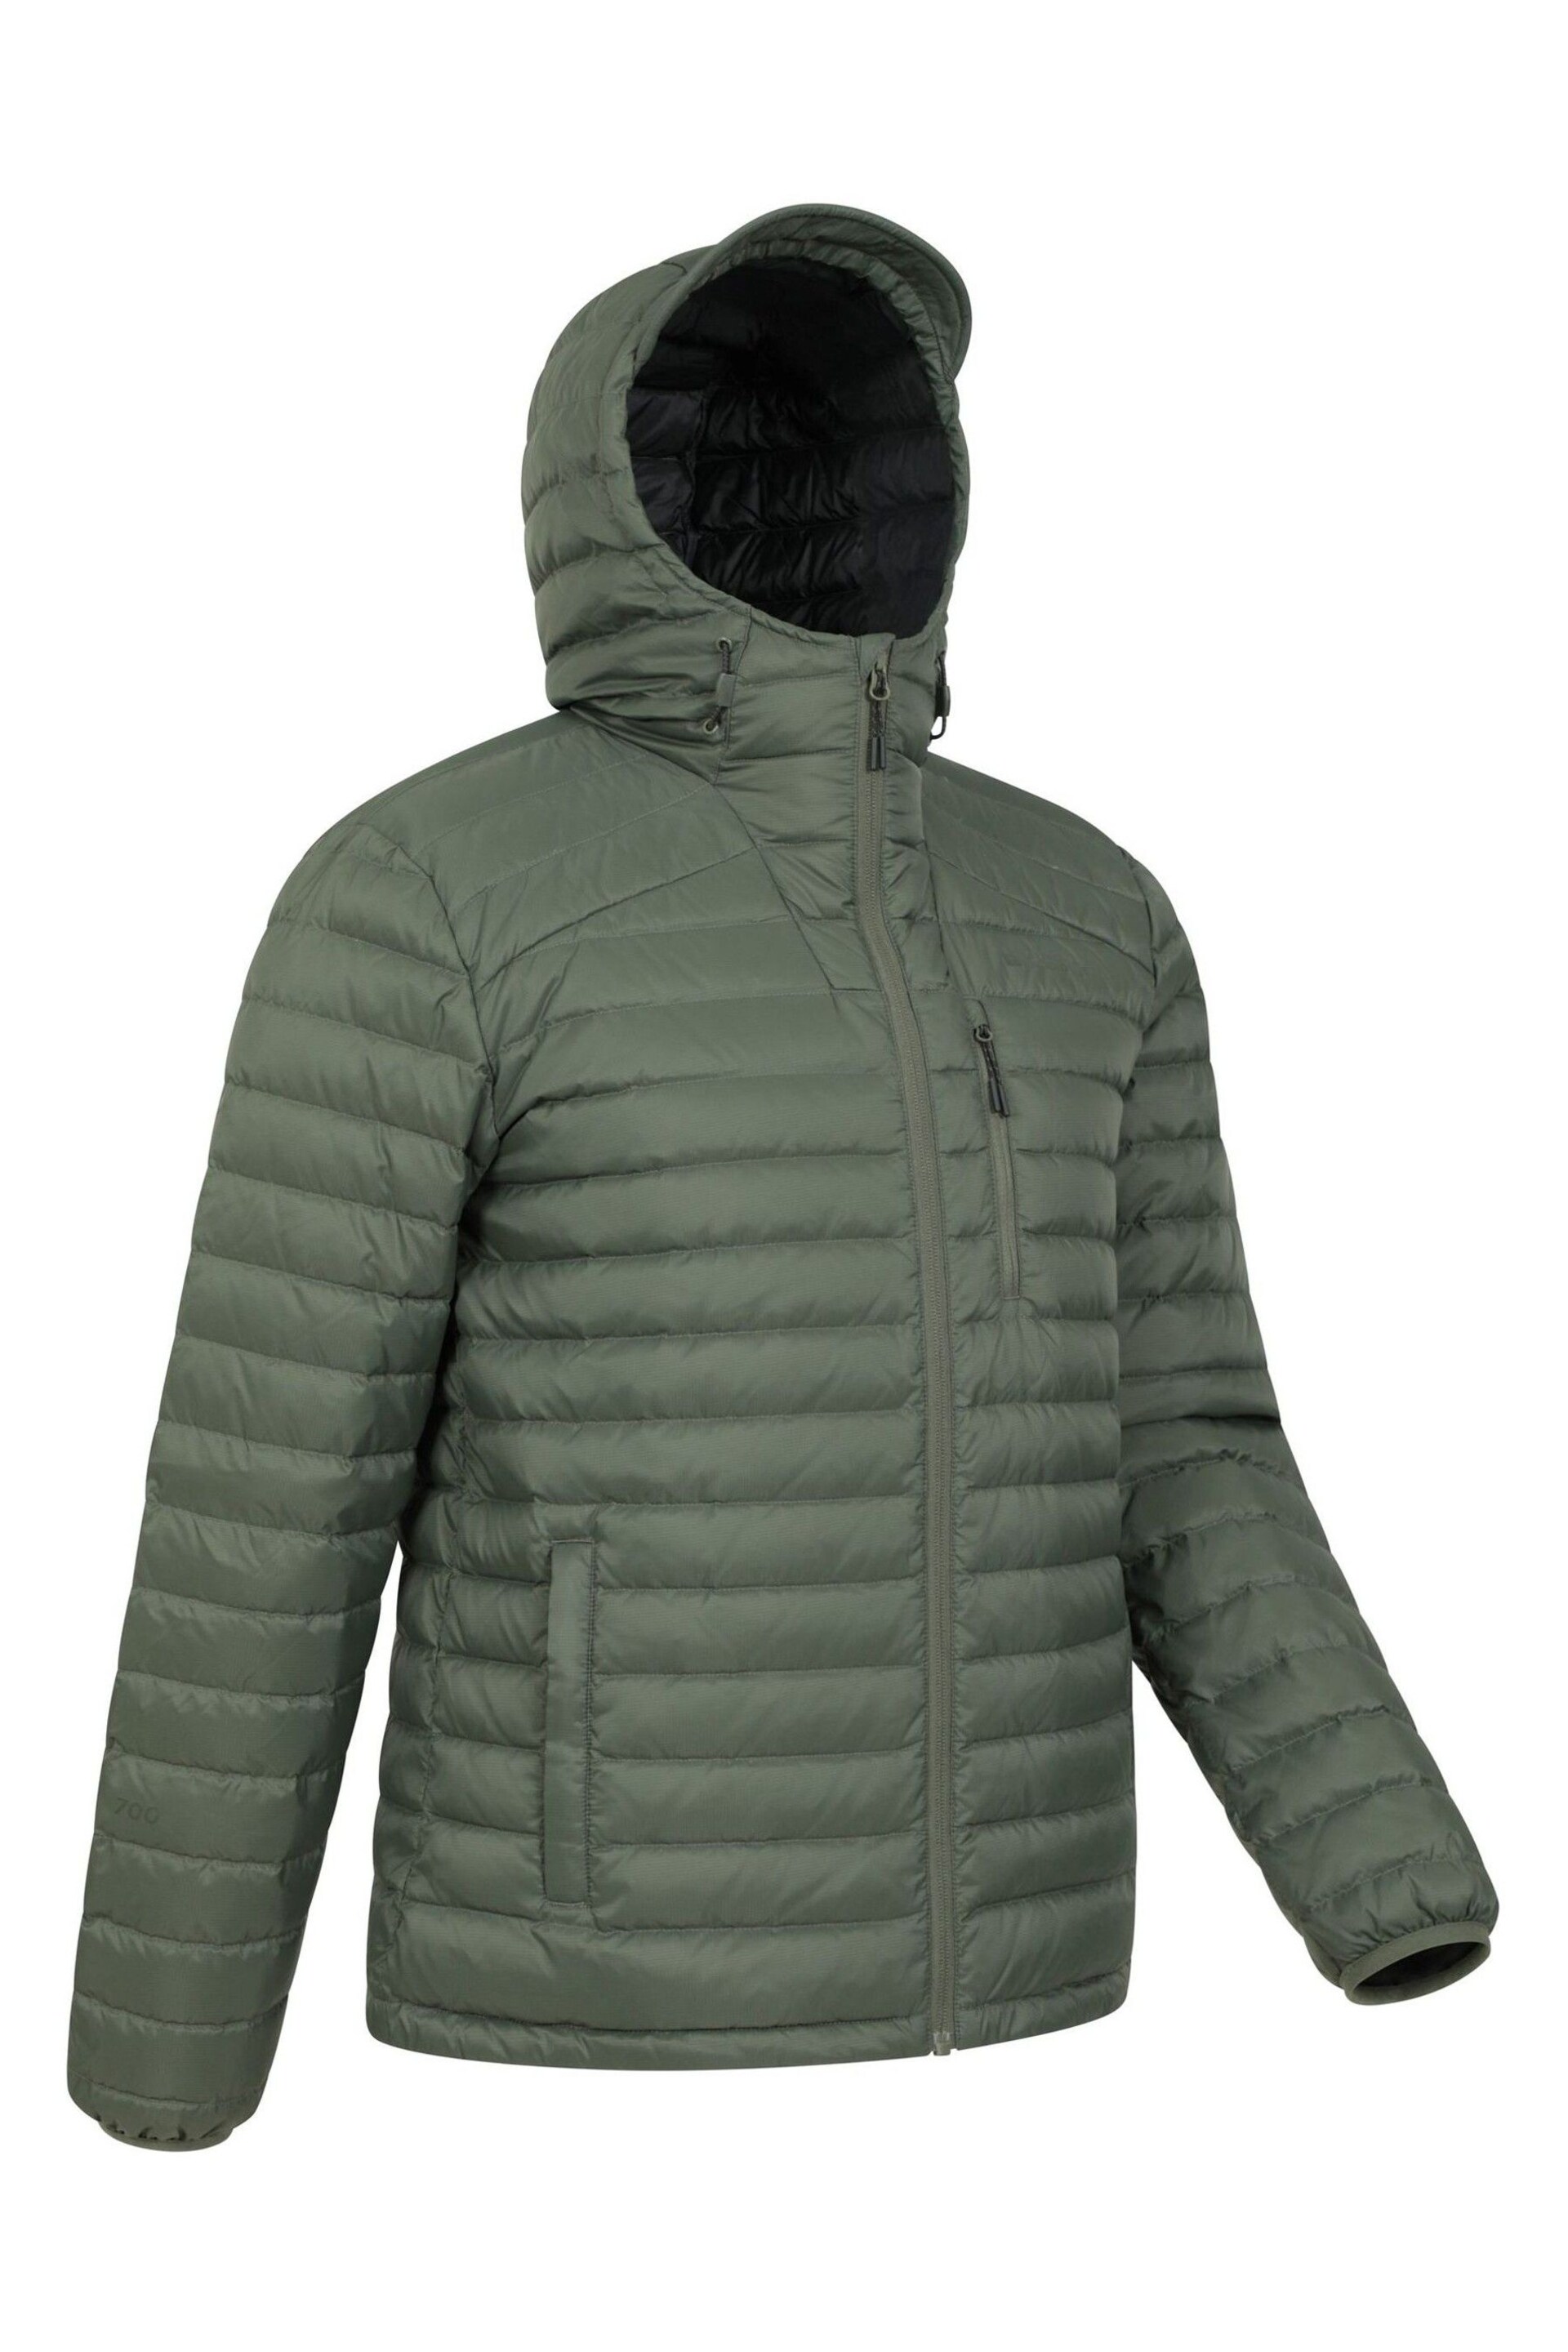 Mountain Warehouse Green Mens Henry II Extreme Water Resistant Down Padded Jacket - Image 4 of 5